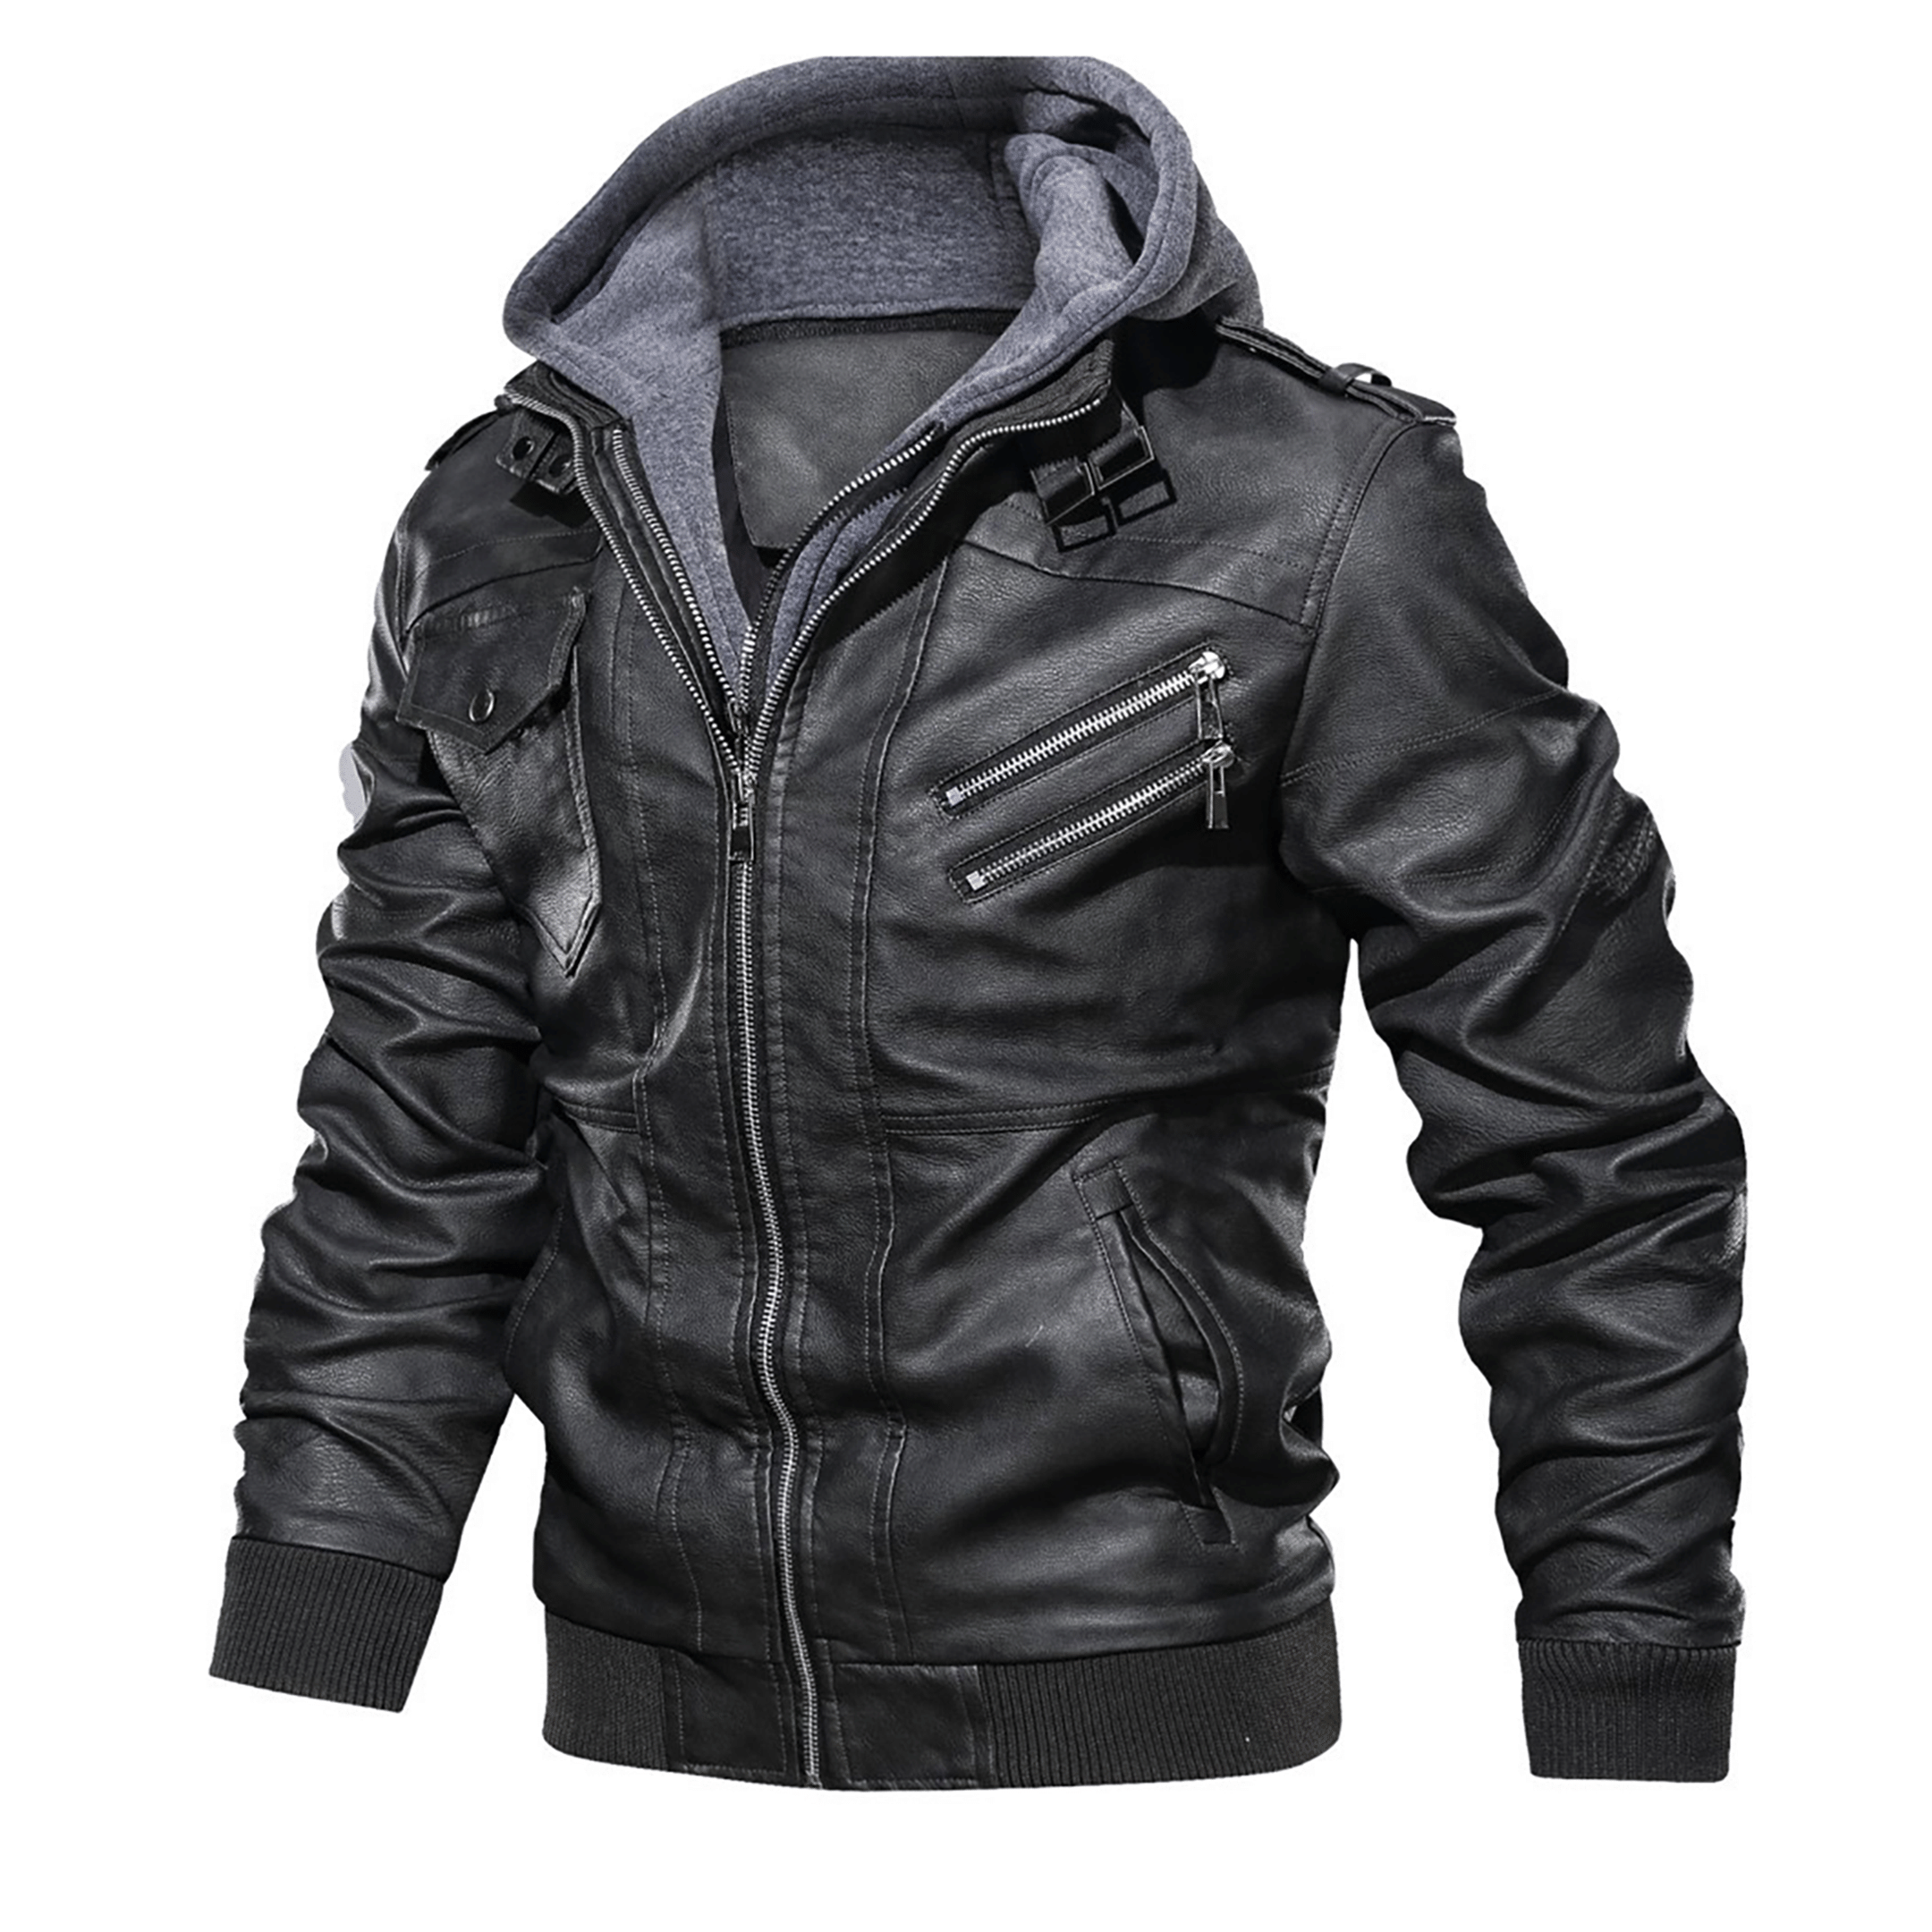 Top leather jackets and latest products 411